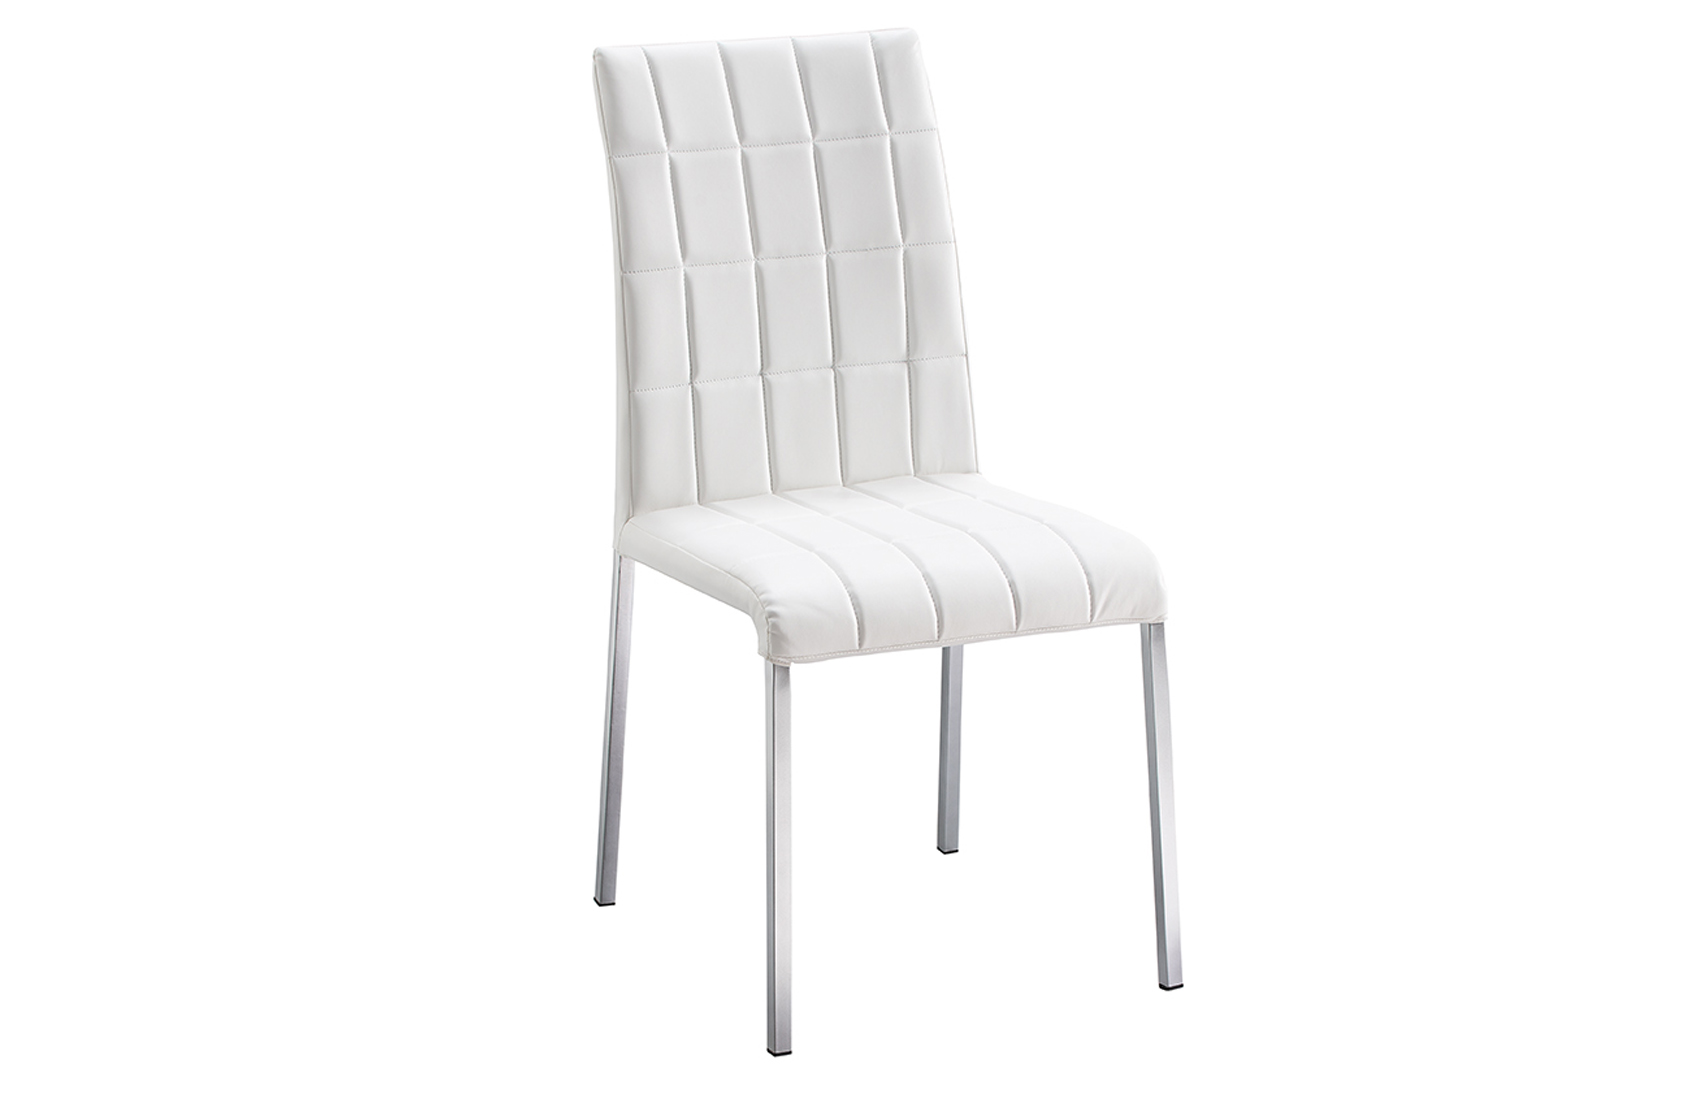 Dining Room Furniture Classic Dining Room Sets 3450 Chair White